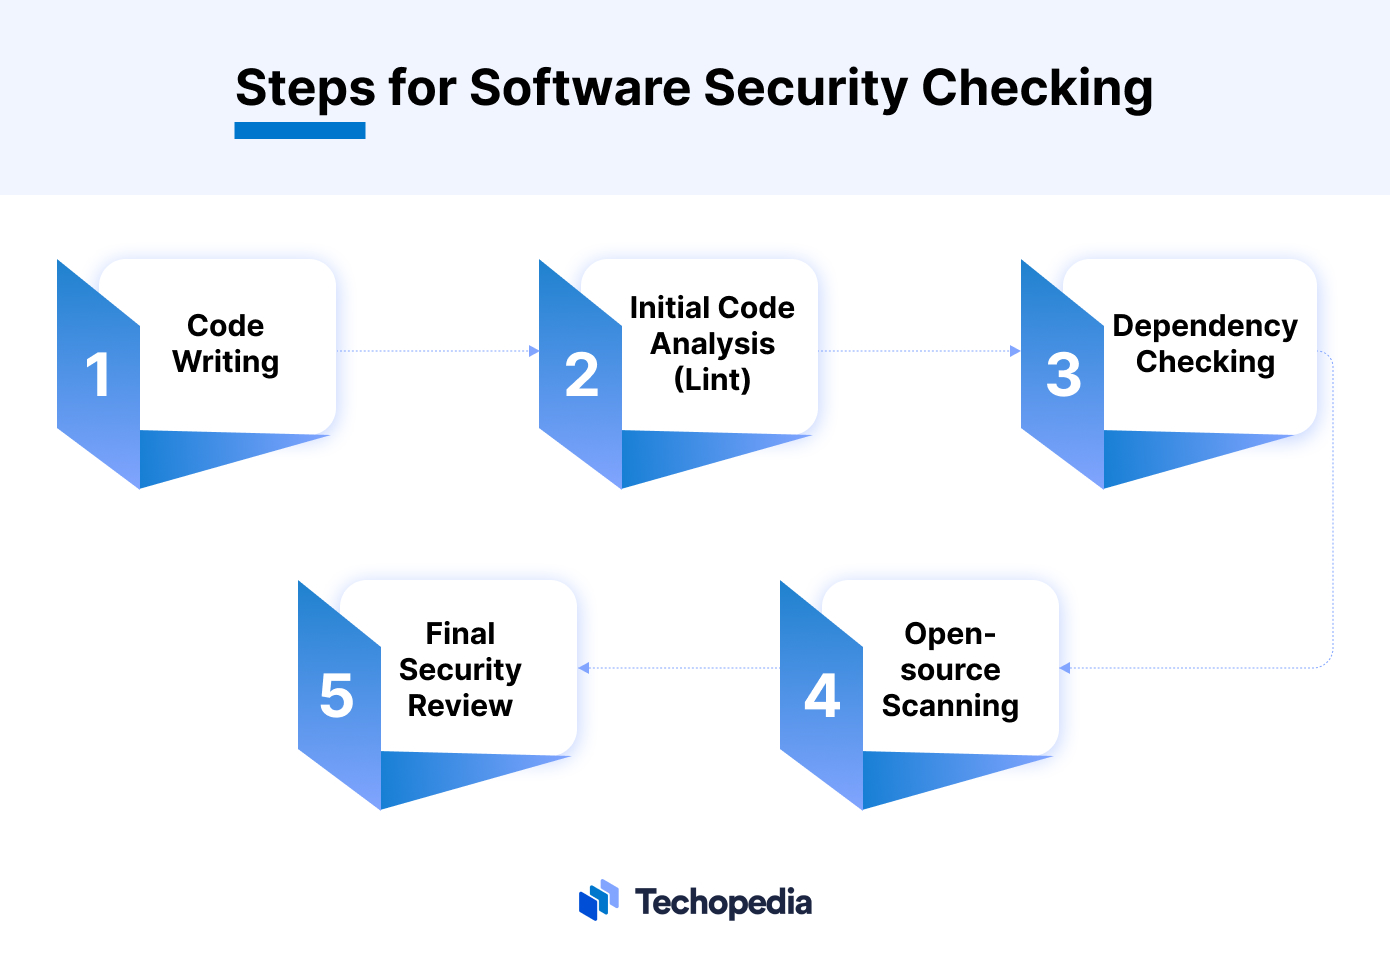 Steps for Software Security Checking